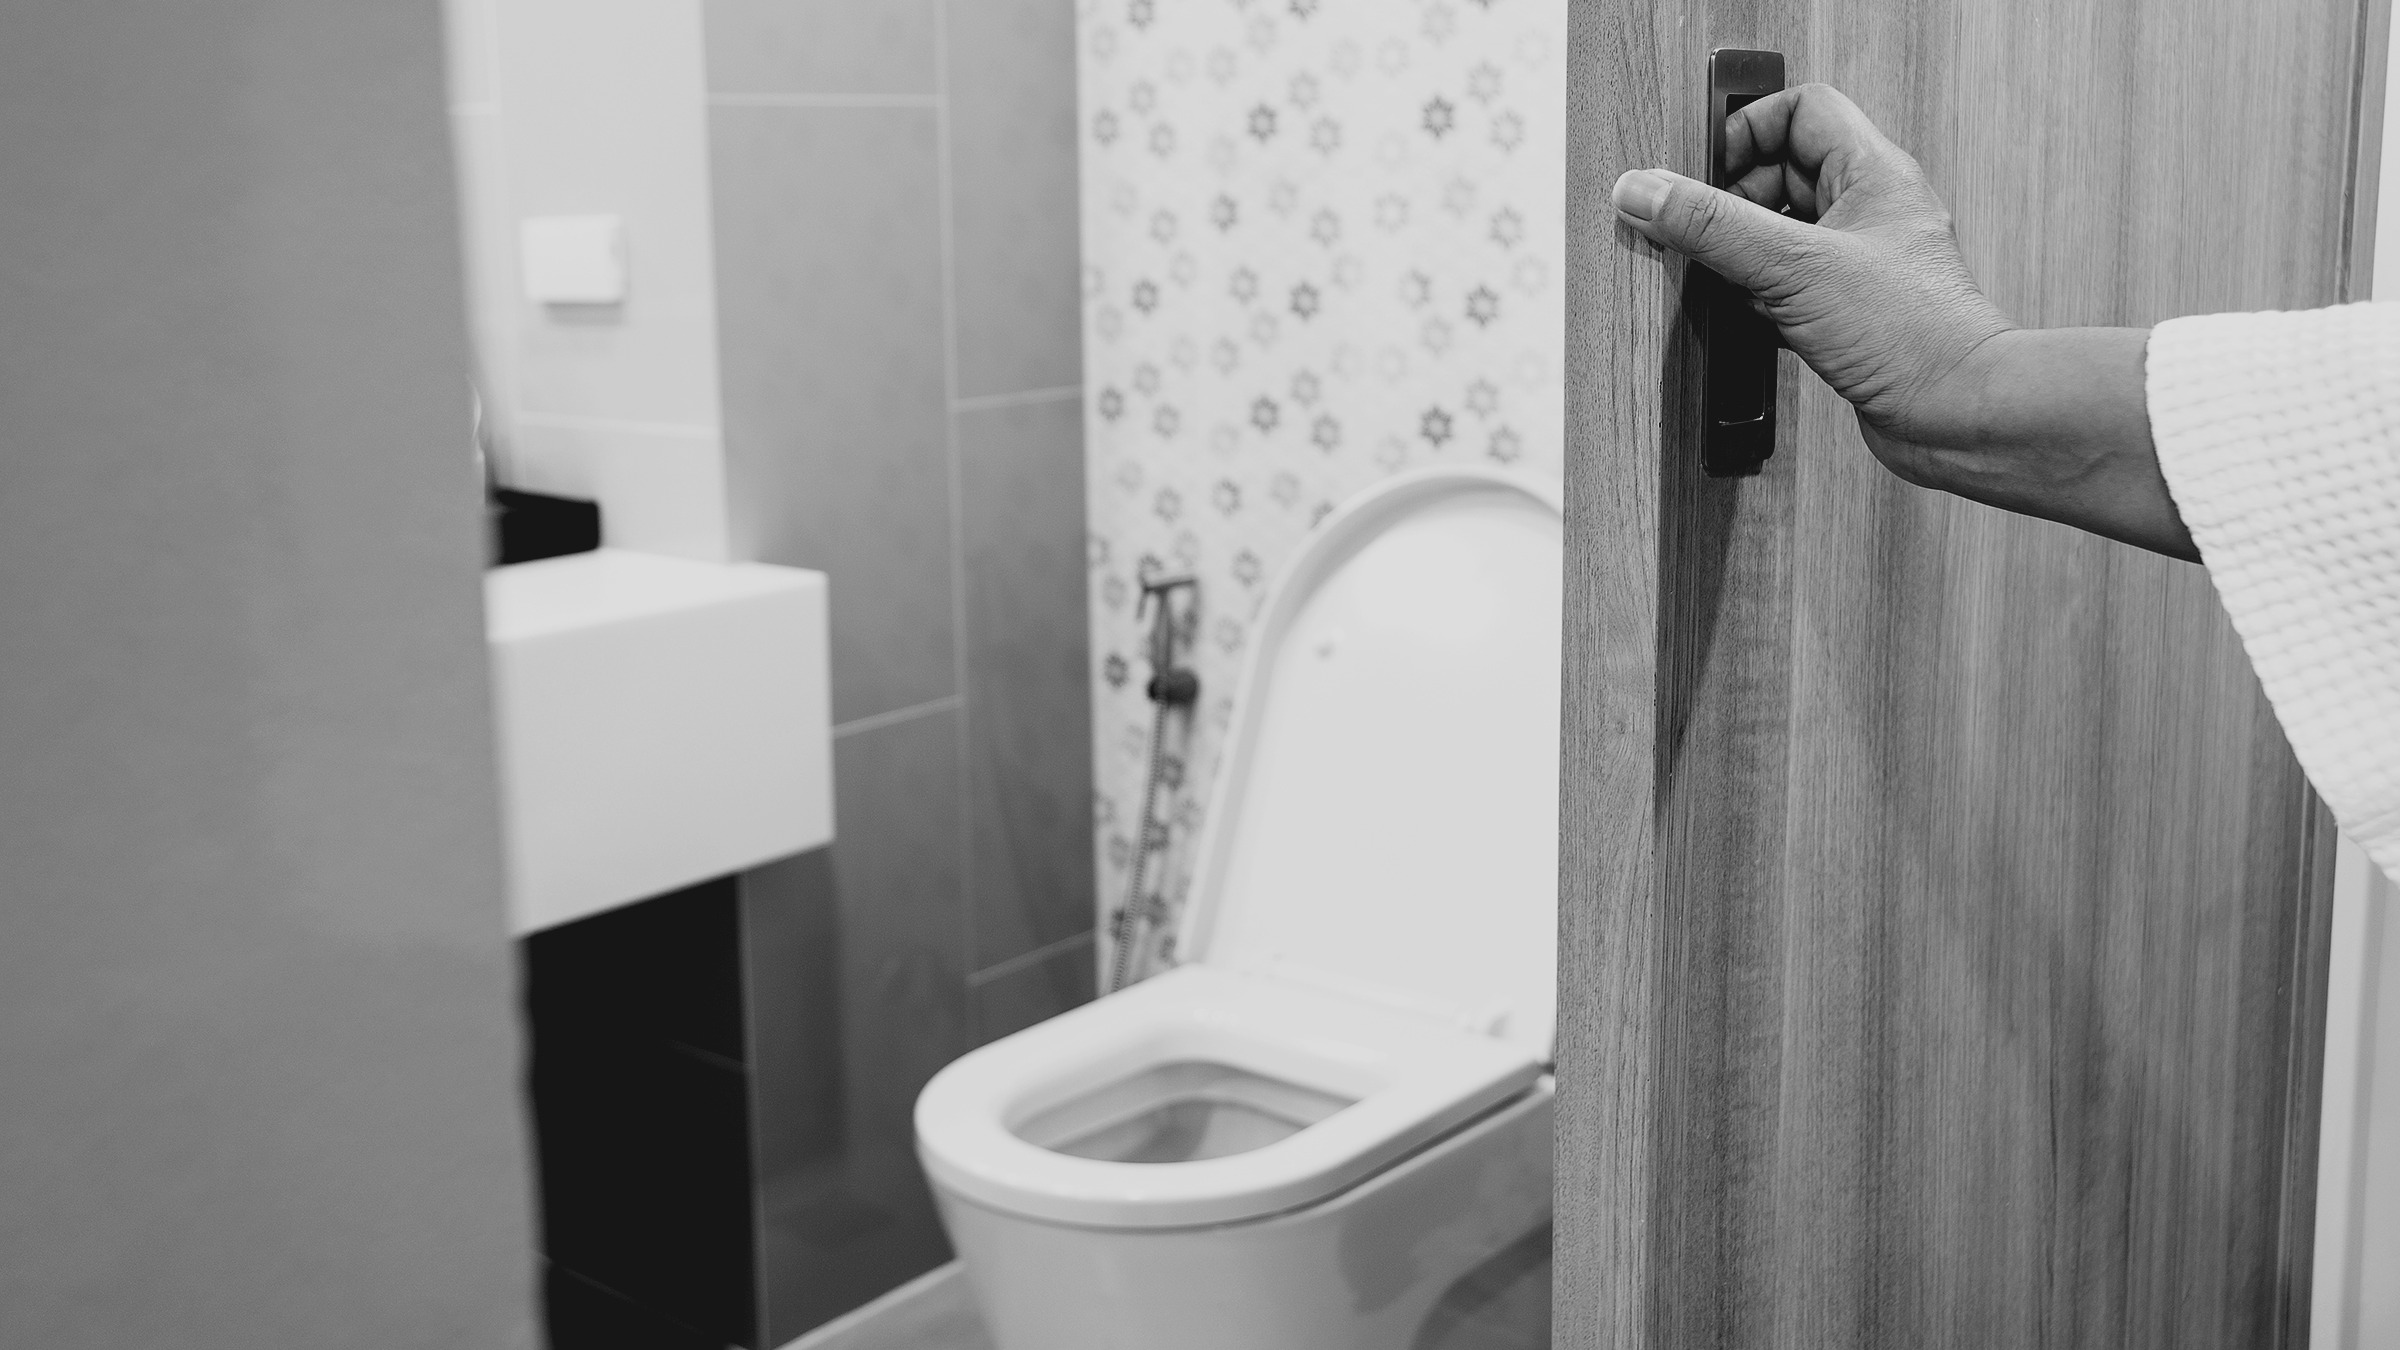 Urinating Too Often? 12 Causes of Frequent Urination in Women